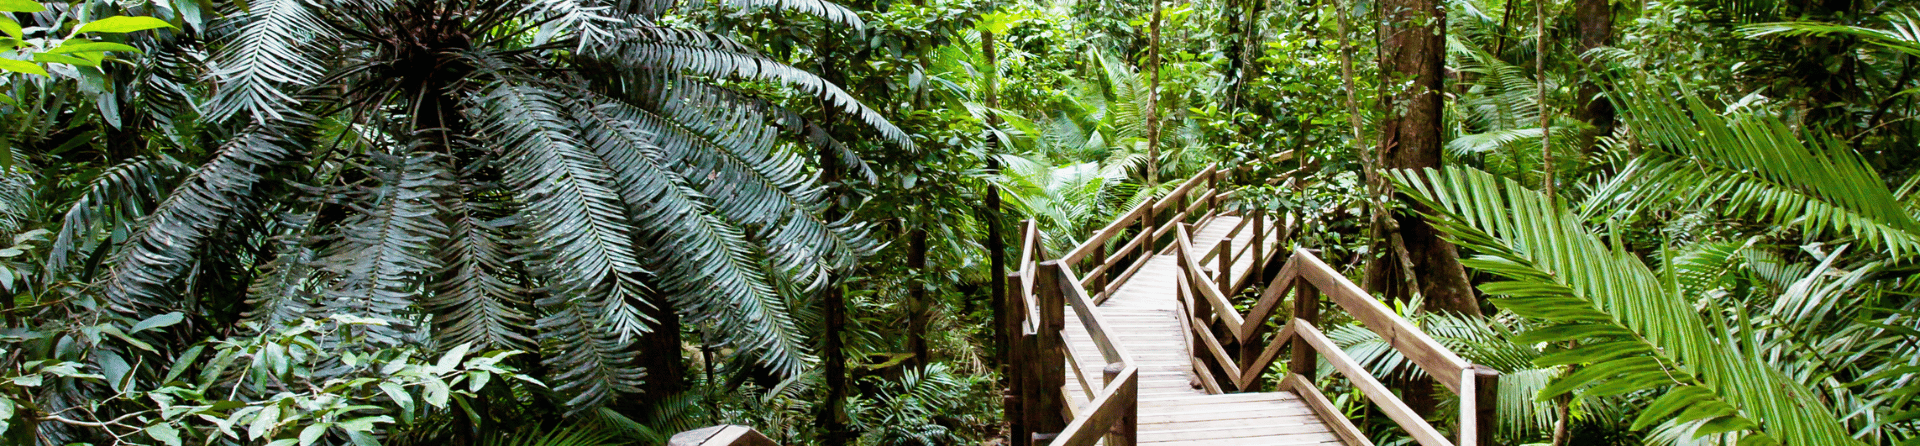 Top 5 things to do in the Daintree Rainforest